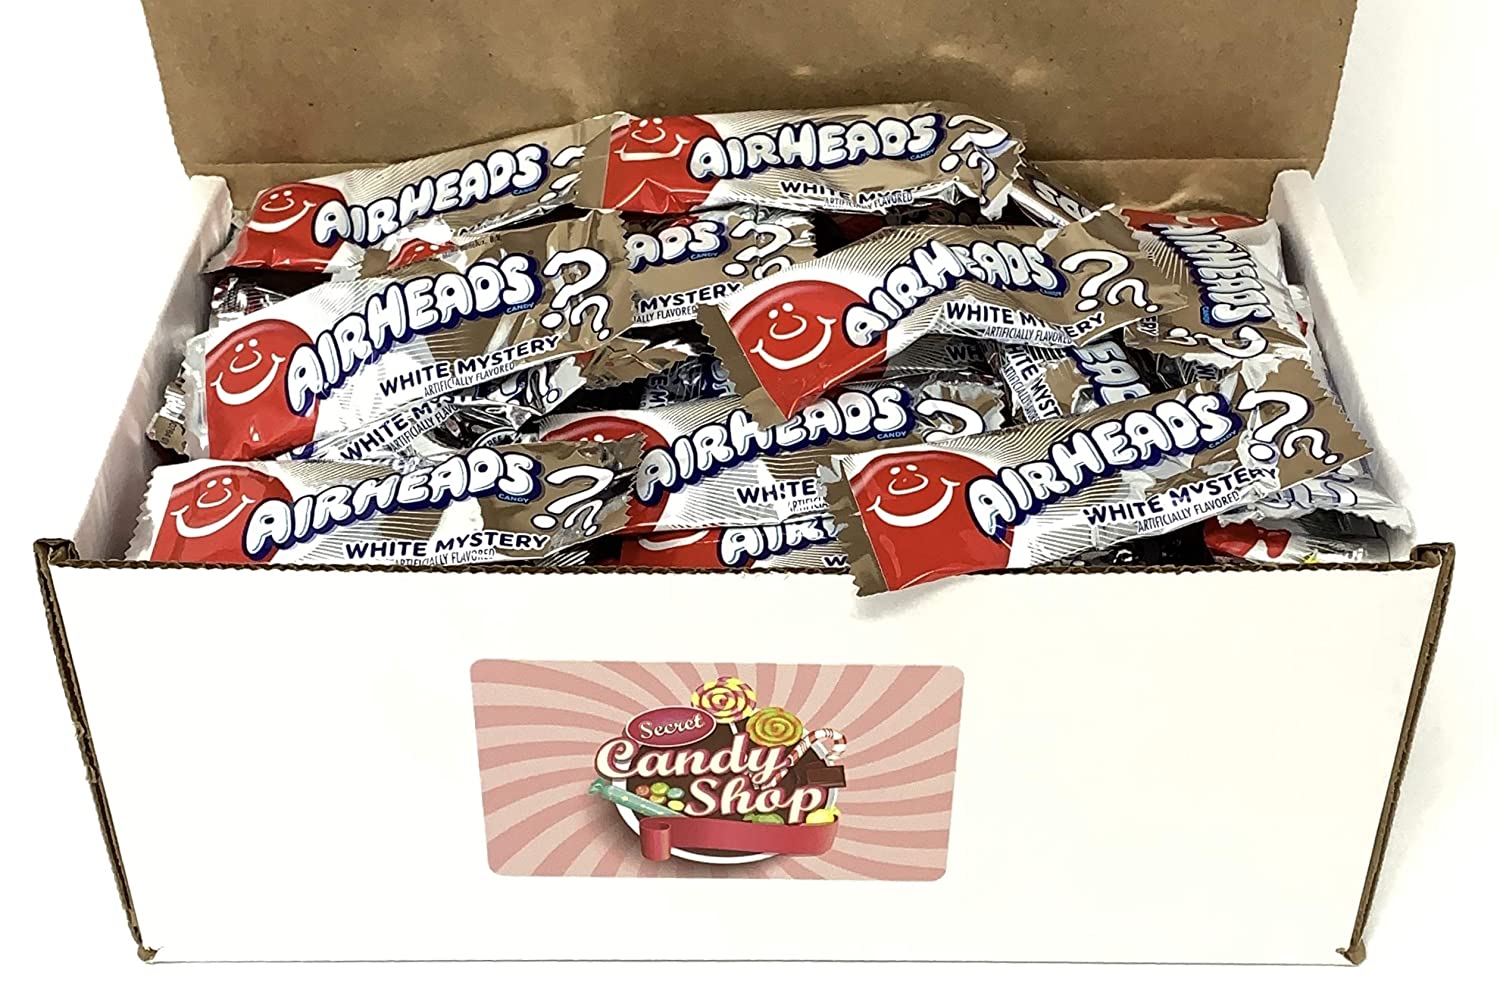 AirHeads White Mystery Taffy Mini Candy in Box, 2lb